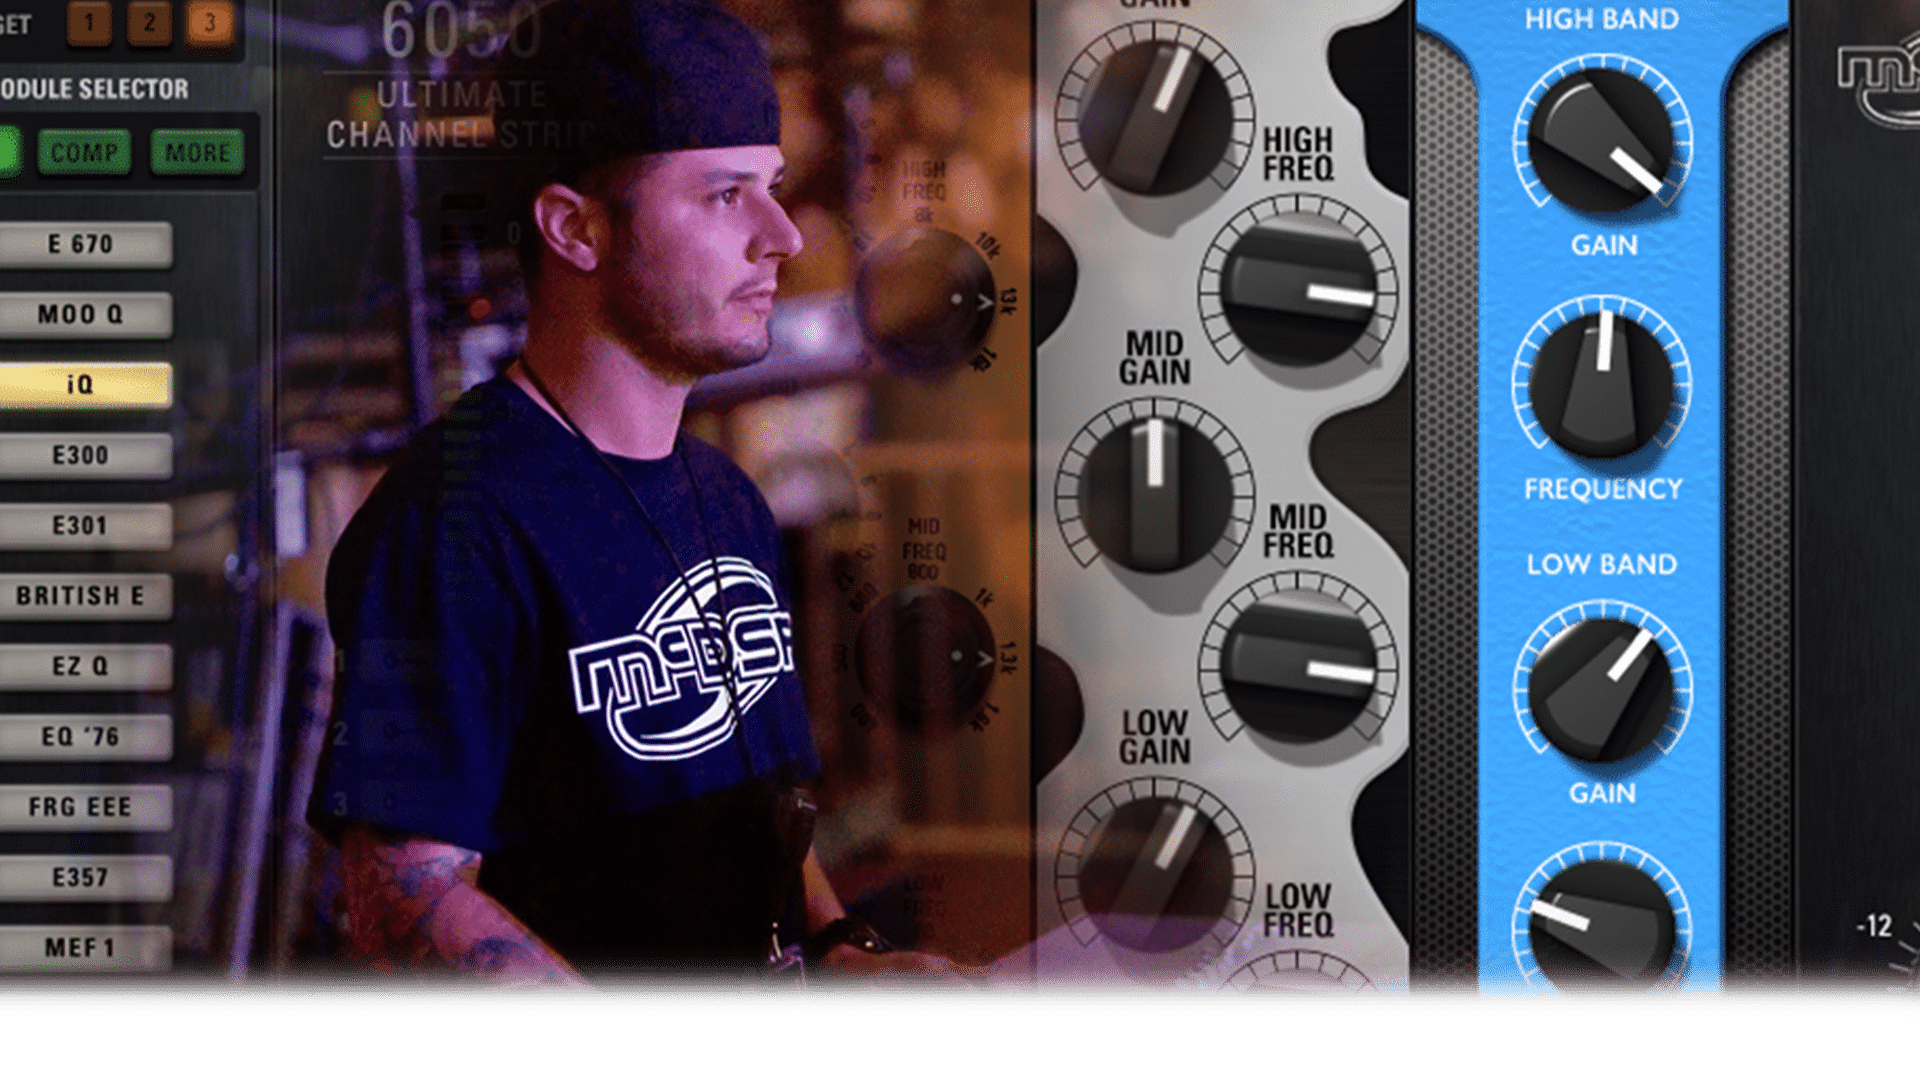 6050 Ultimate Channel Strip HD v7 by McDSP